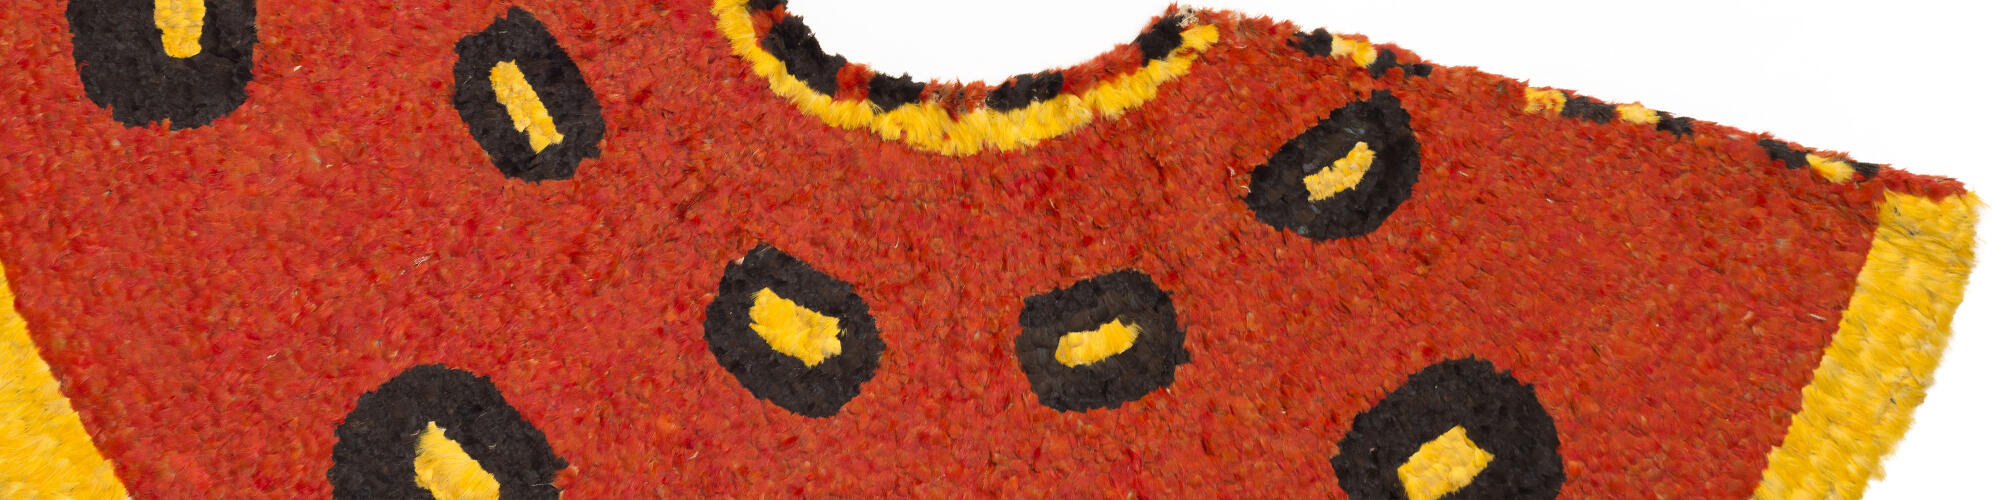 Red, yellow and black feathered cape from Hawaii